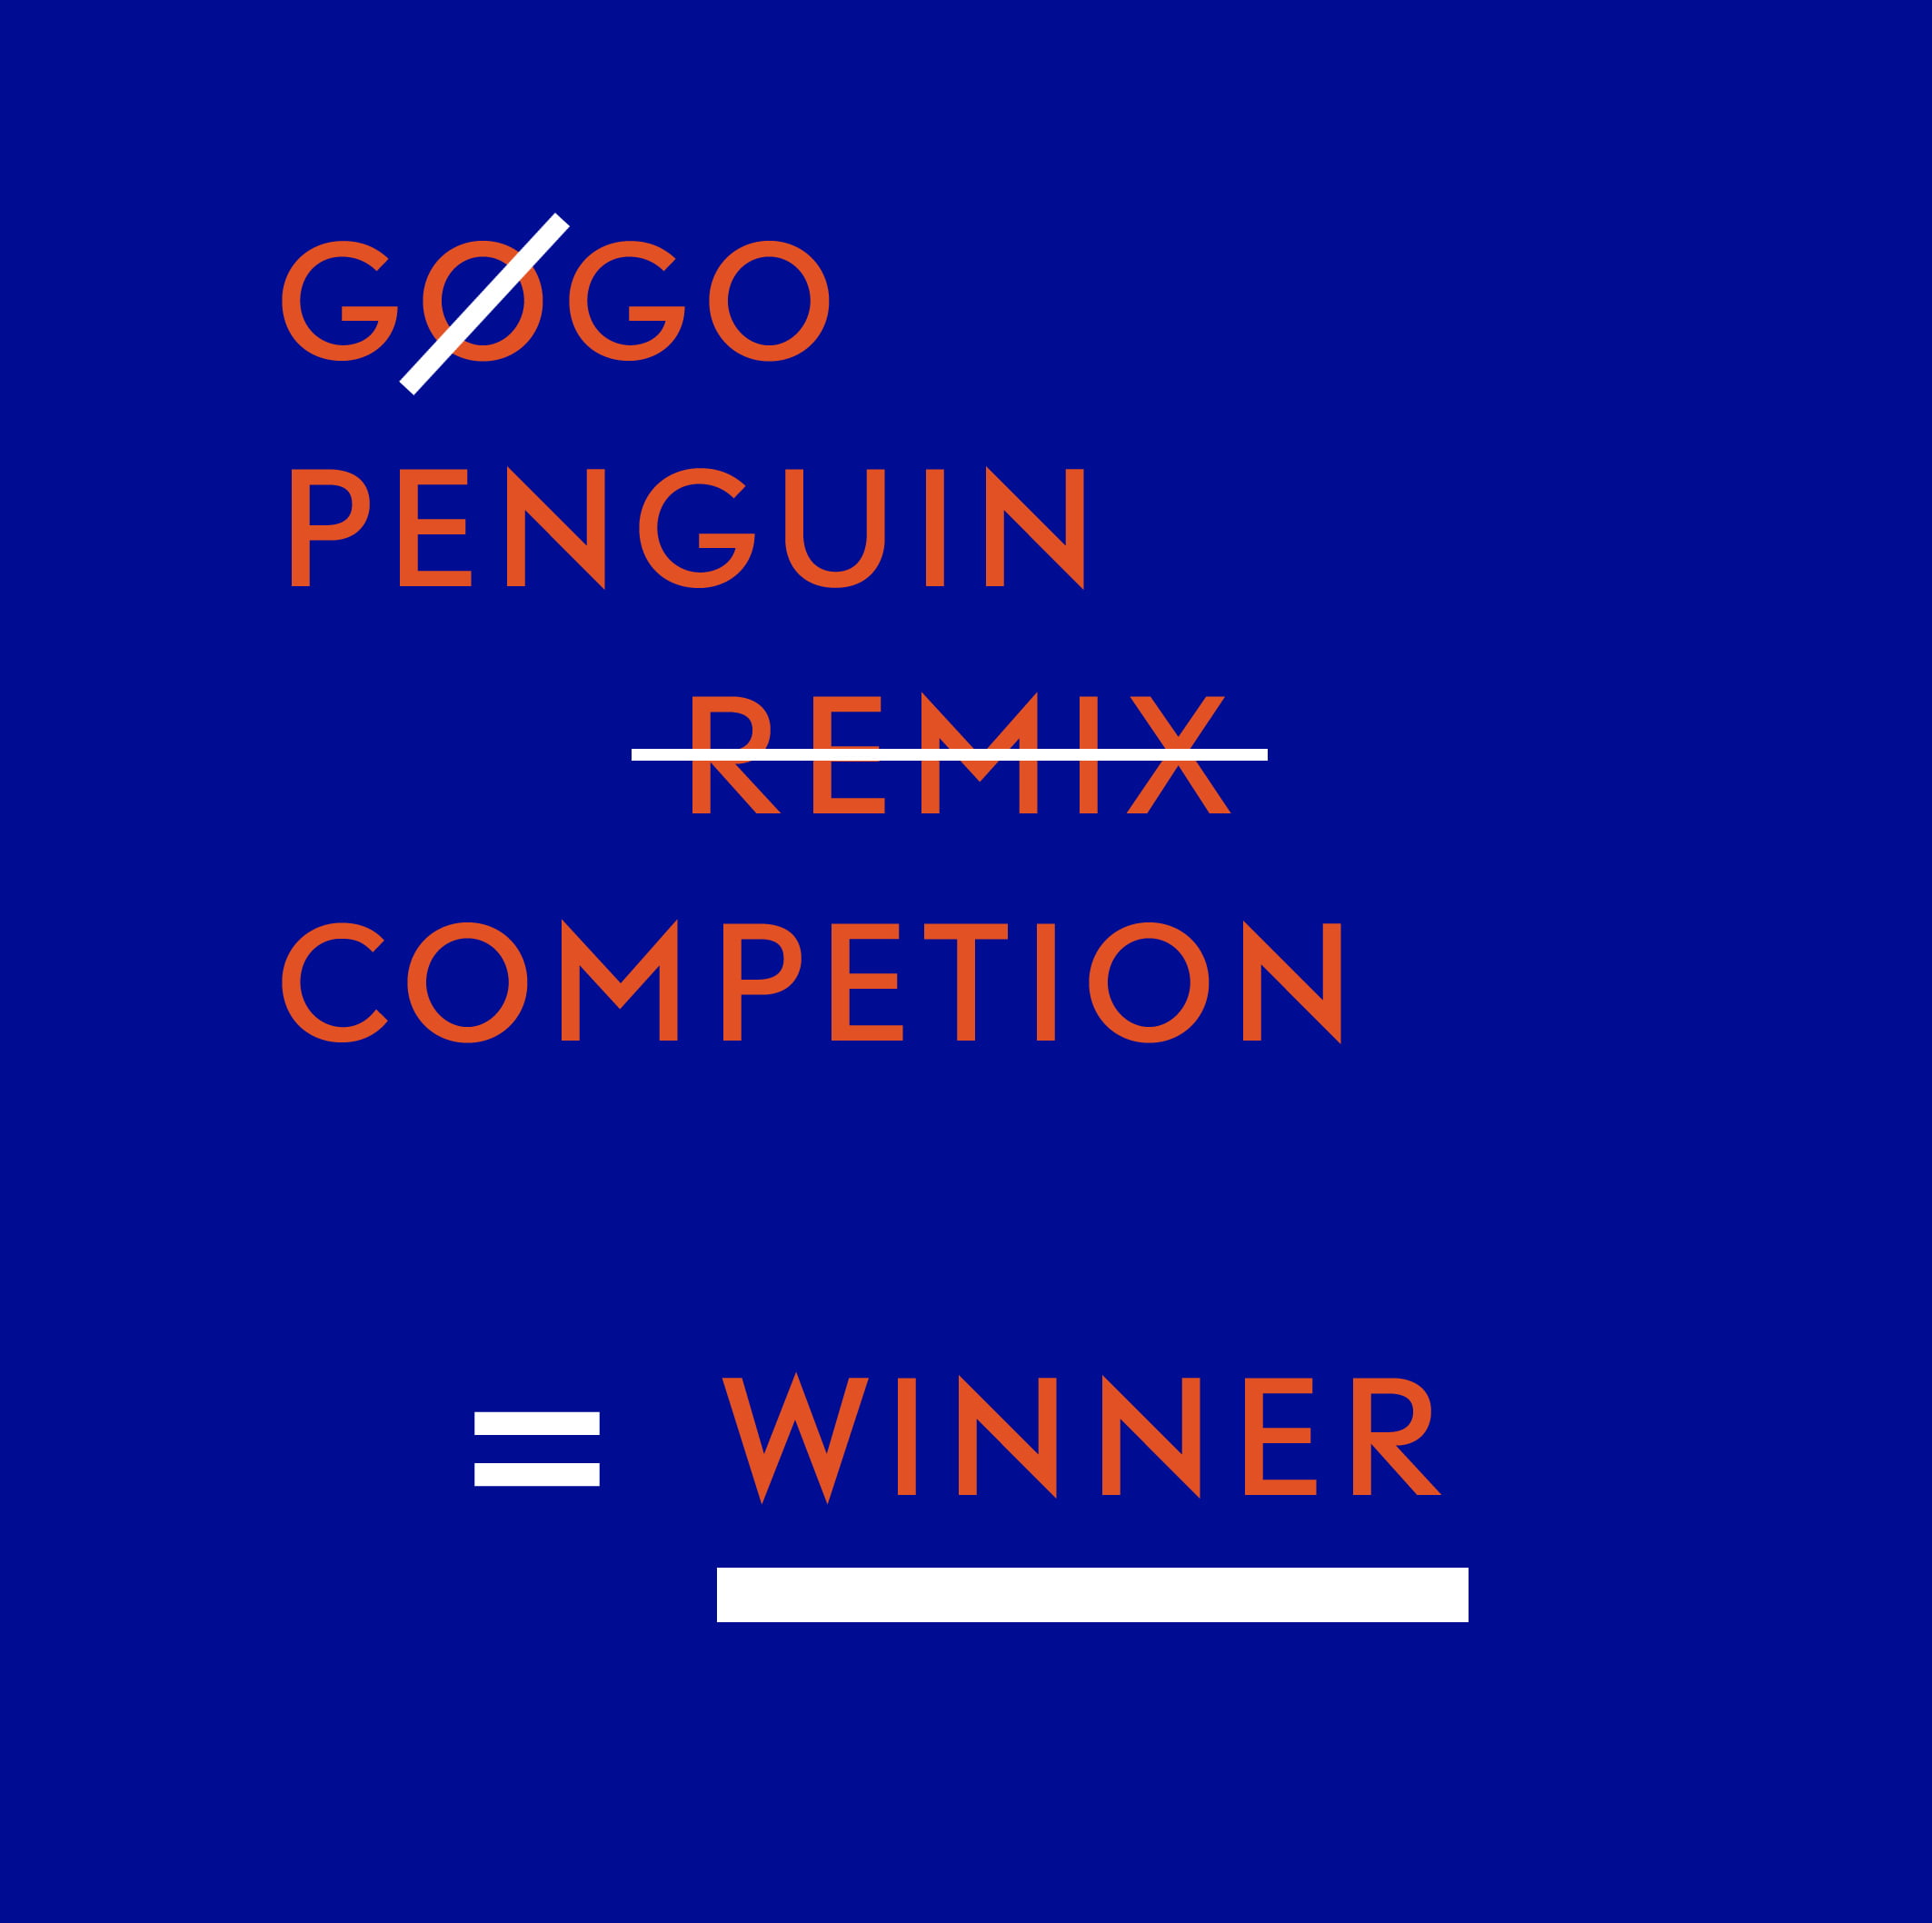 GoGo Penguin announce winner of the Fort remix competition